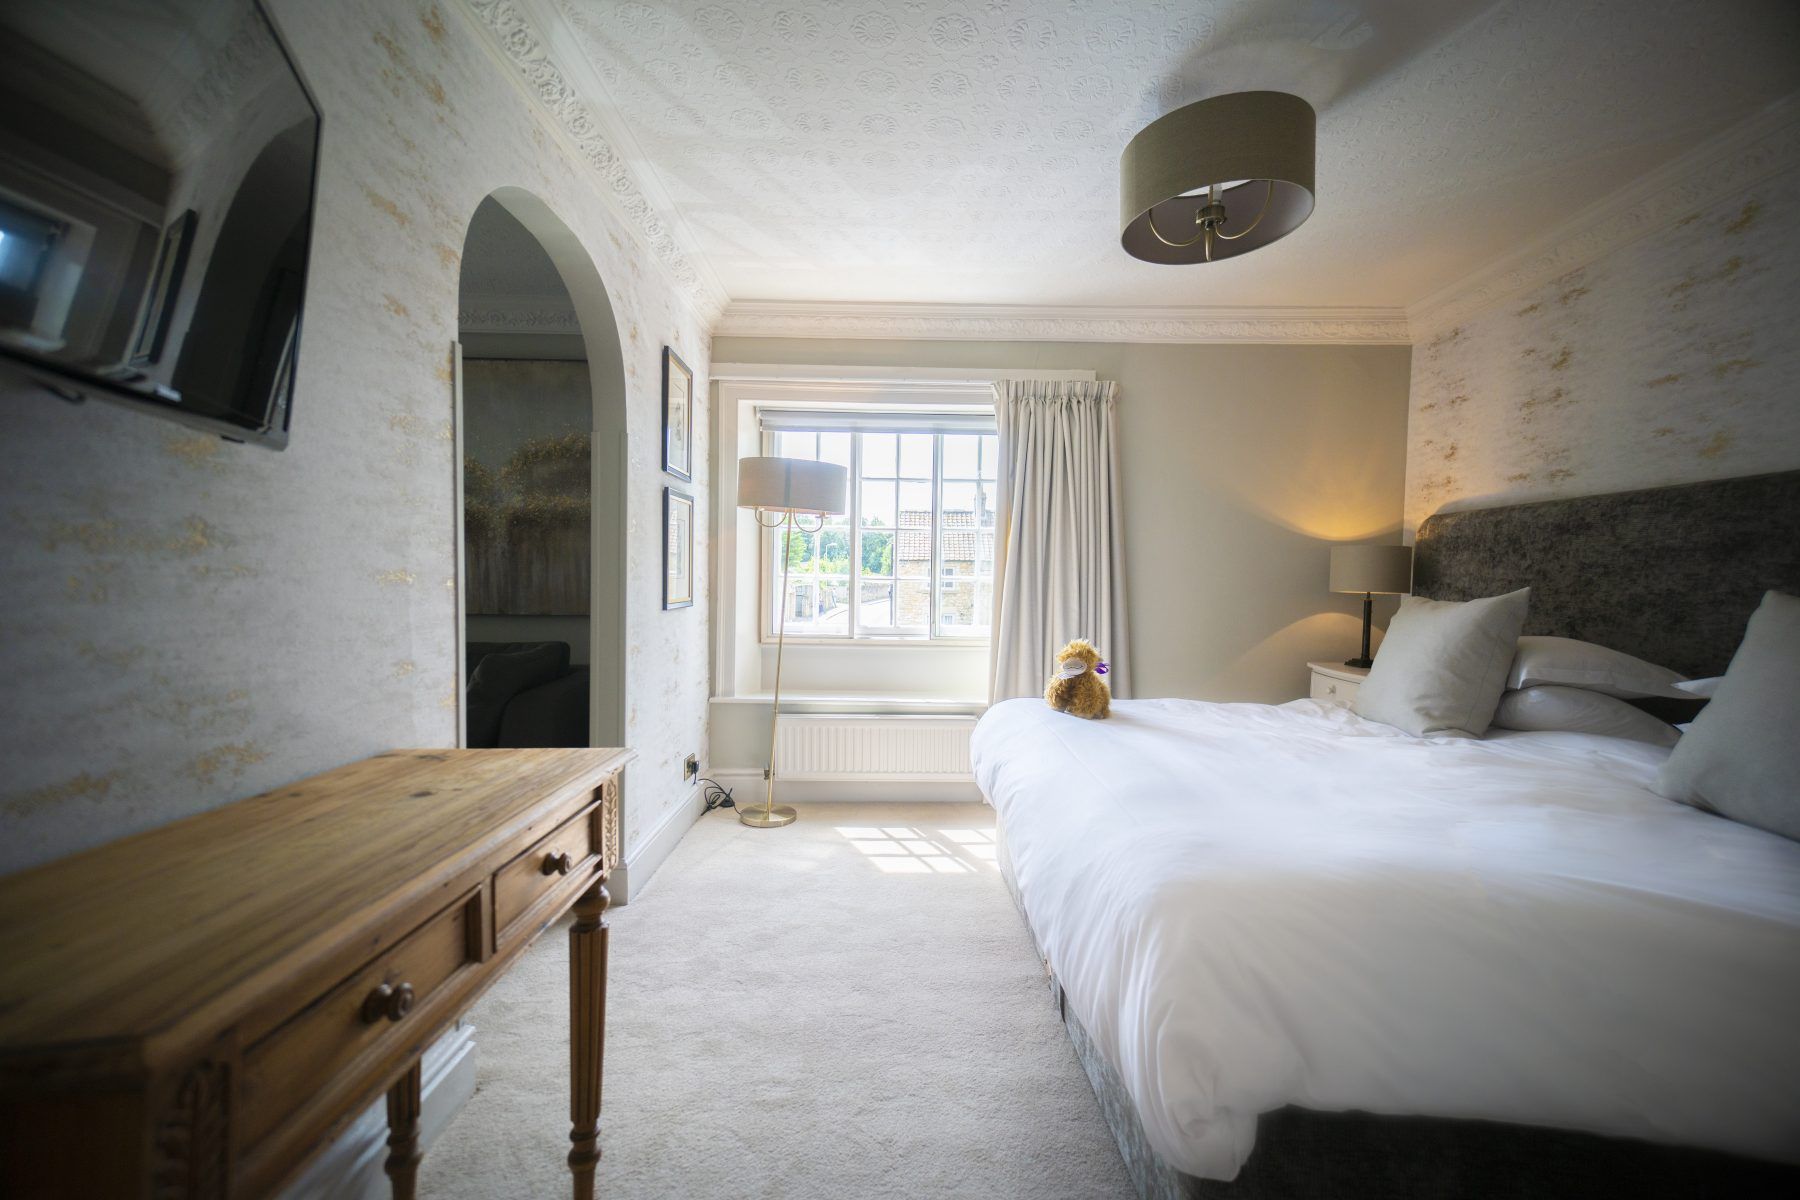 The Feversham Arms suite